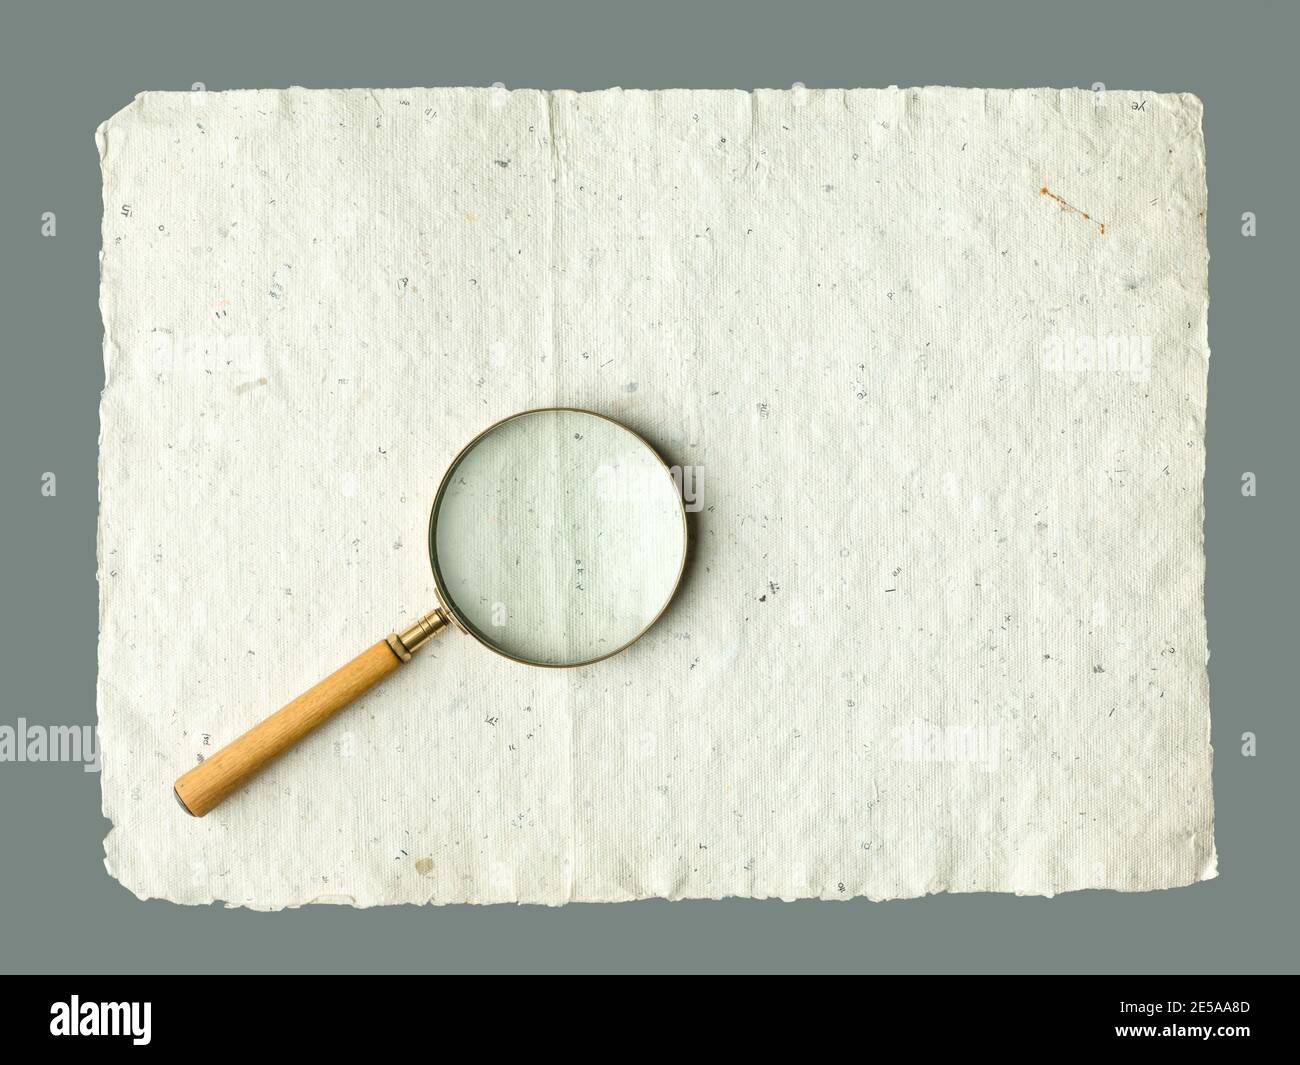 Recycled cream, grey vintage horizontal note paper texture. Vintage magnifier on top. Stock Photo